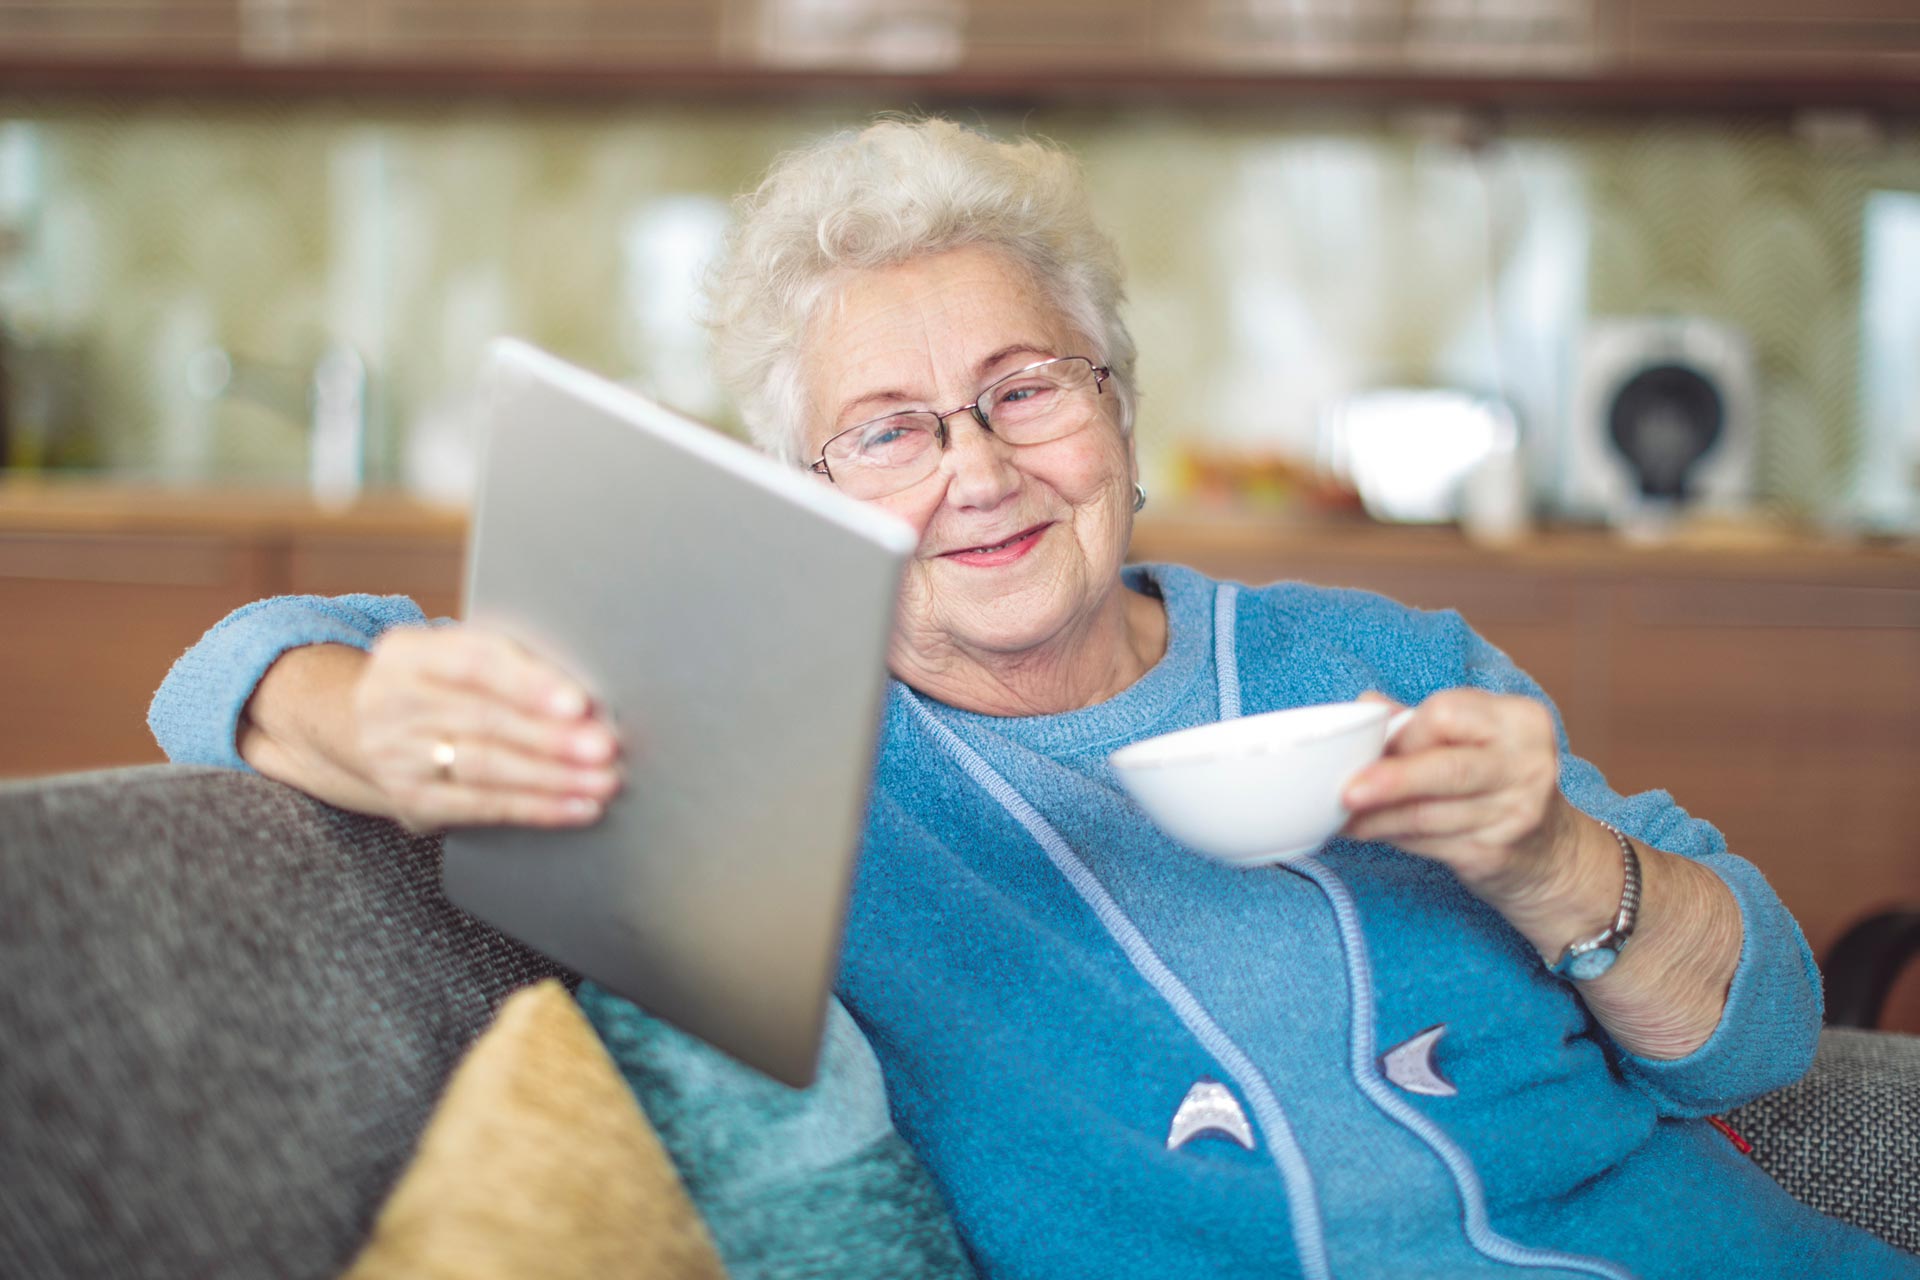 18 Activity Ideas for Elderly Loved Ones 